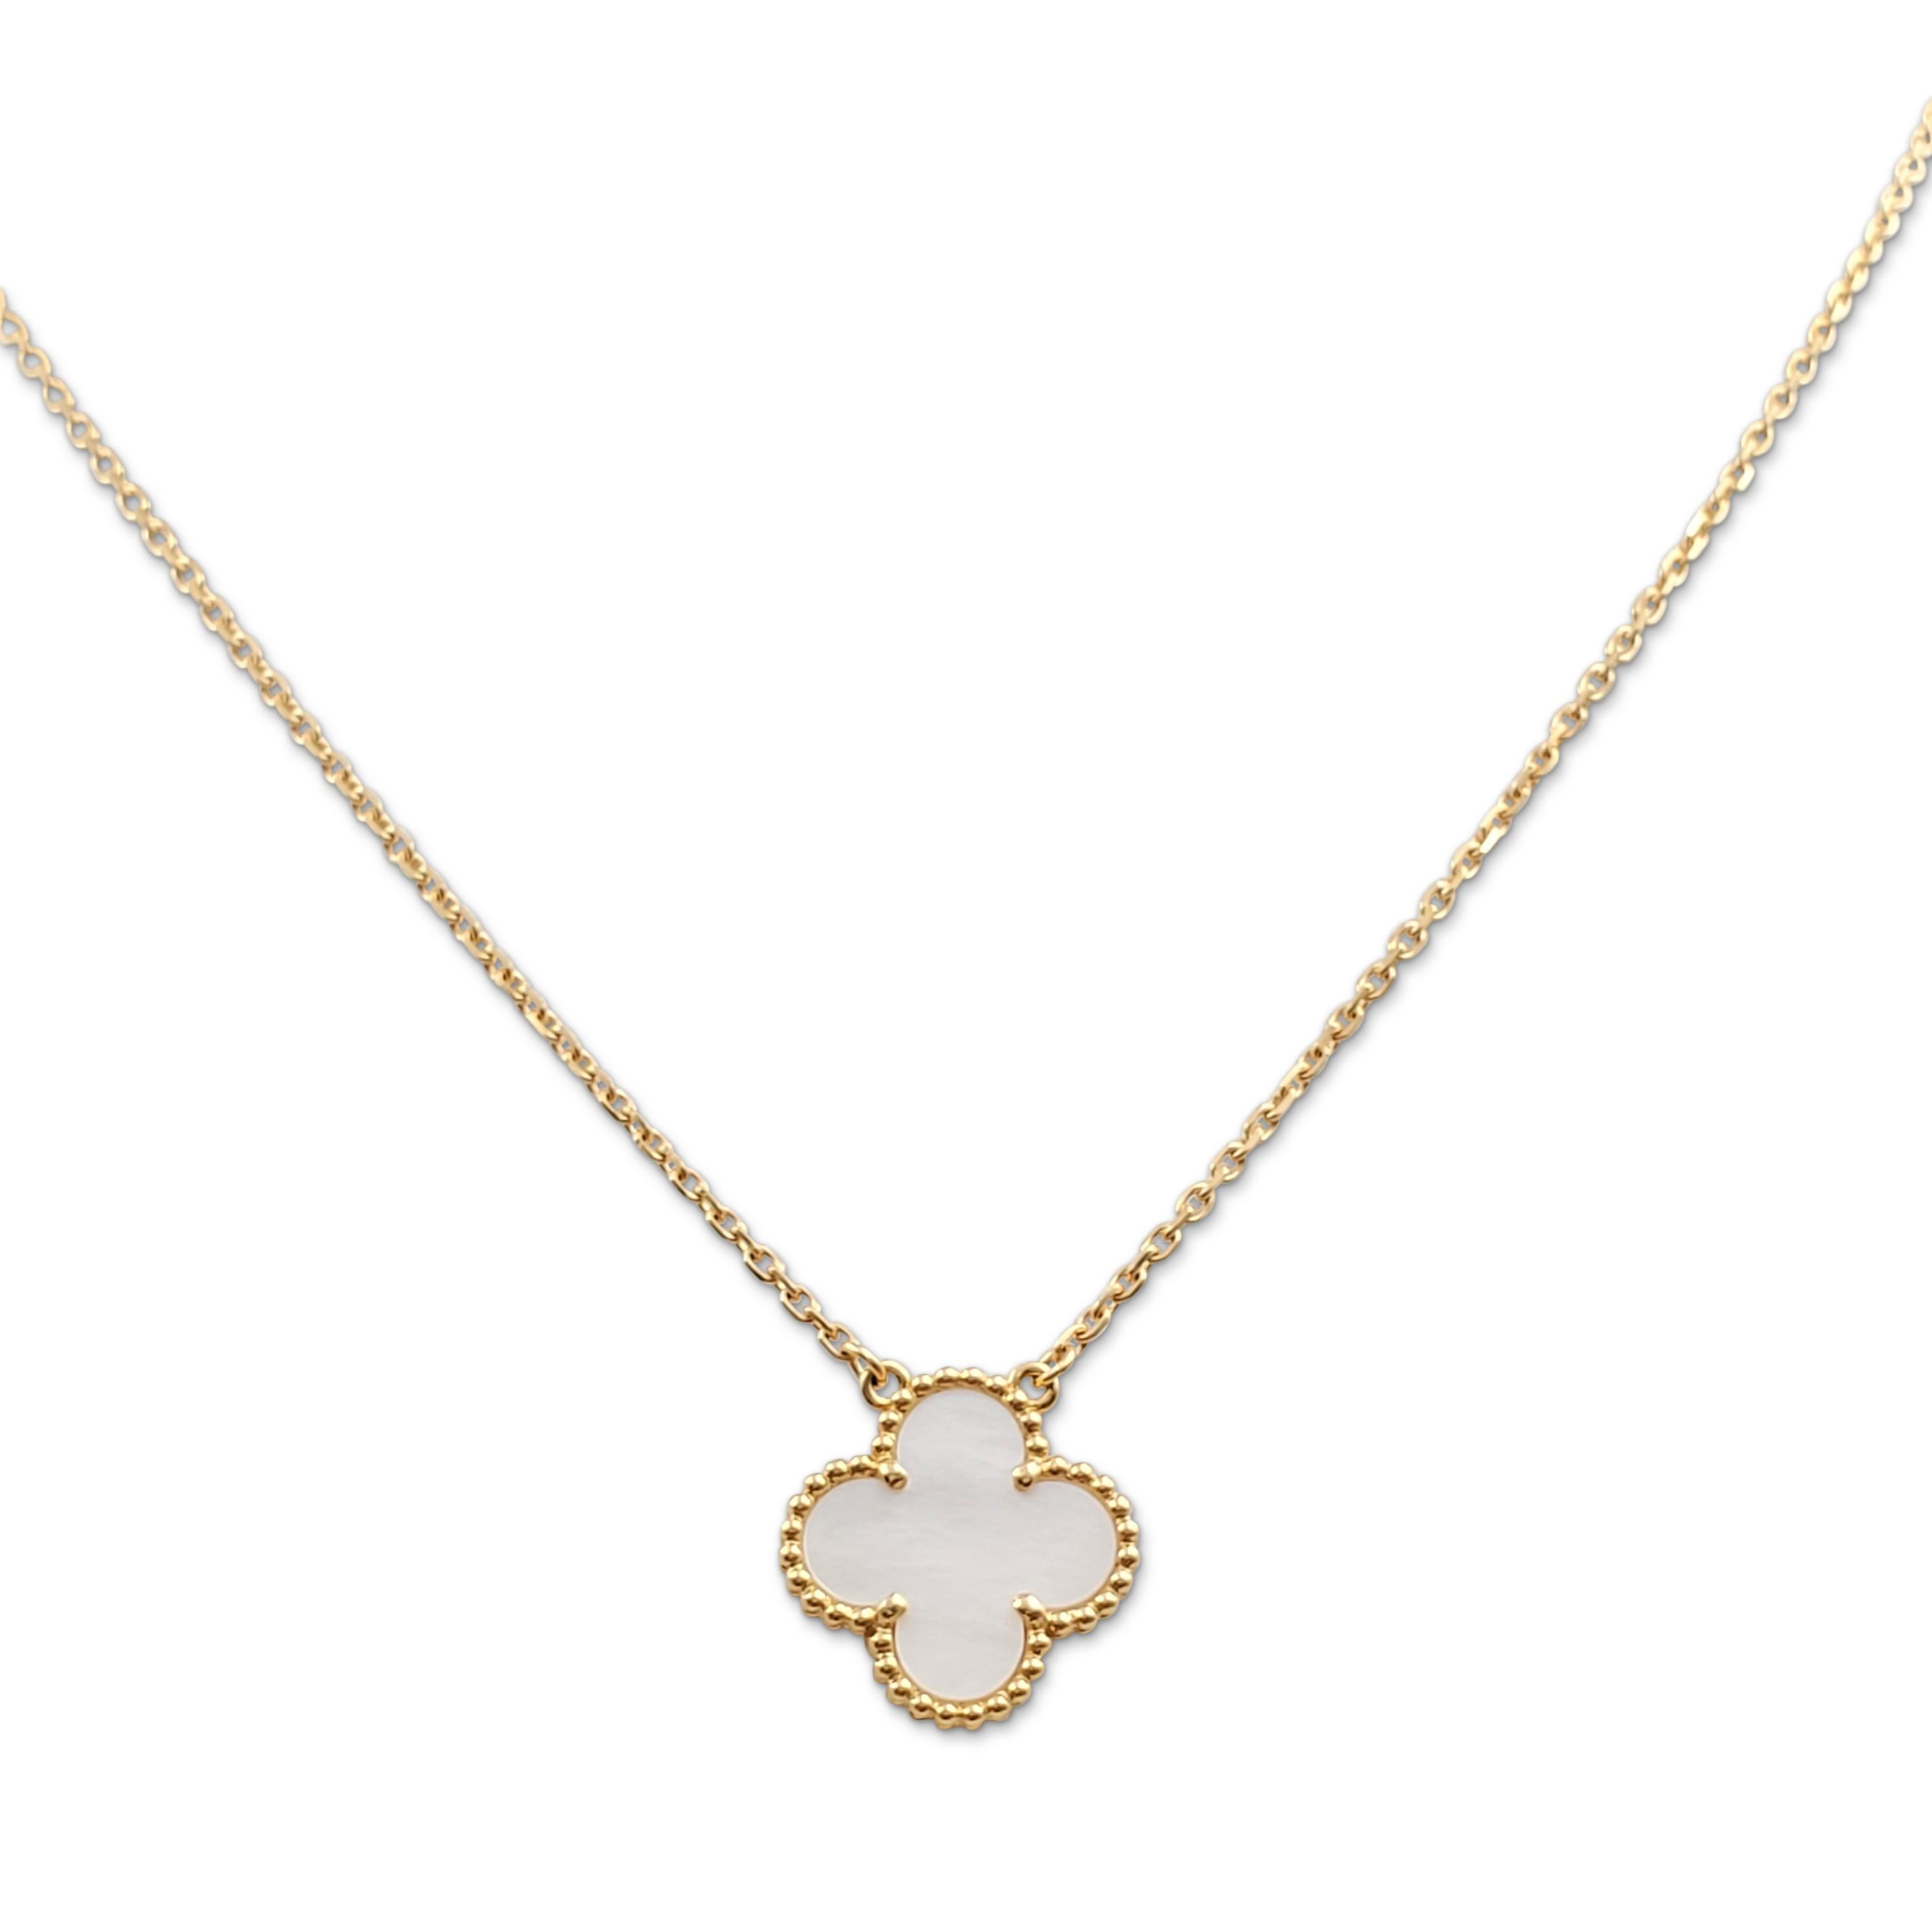 Authentic Van Cleef & Arpels 'Vintage Alhambra' pendant necklace crafted in 18 karat yellow gold features a single mother-of-pearl clover-inspired motif. Signed VCA, Au750, with serial number. The adjustable chain measures 16 1/2 inches in length.